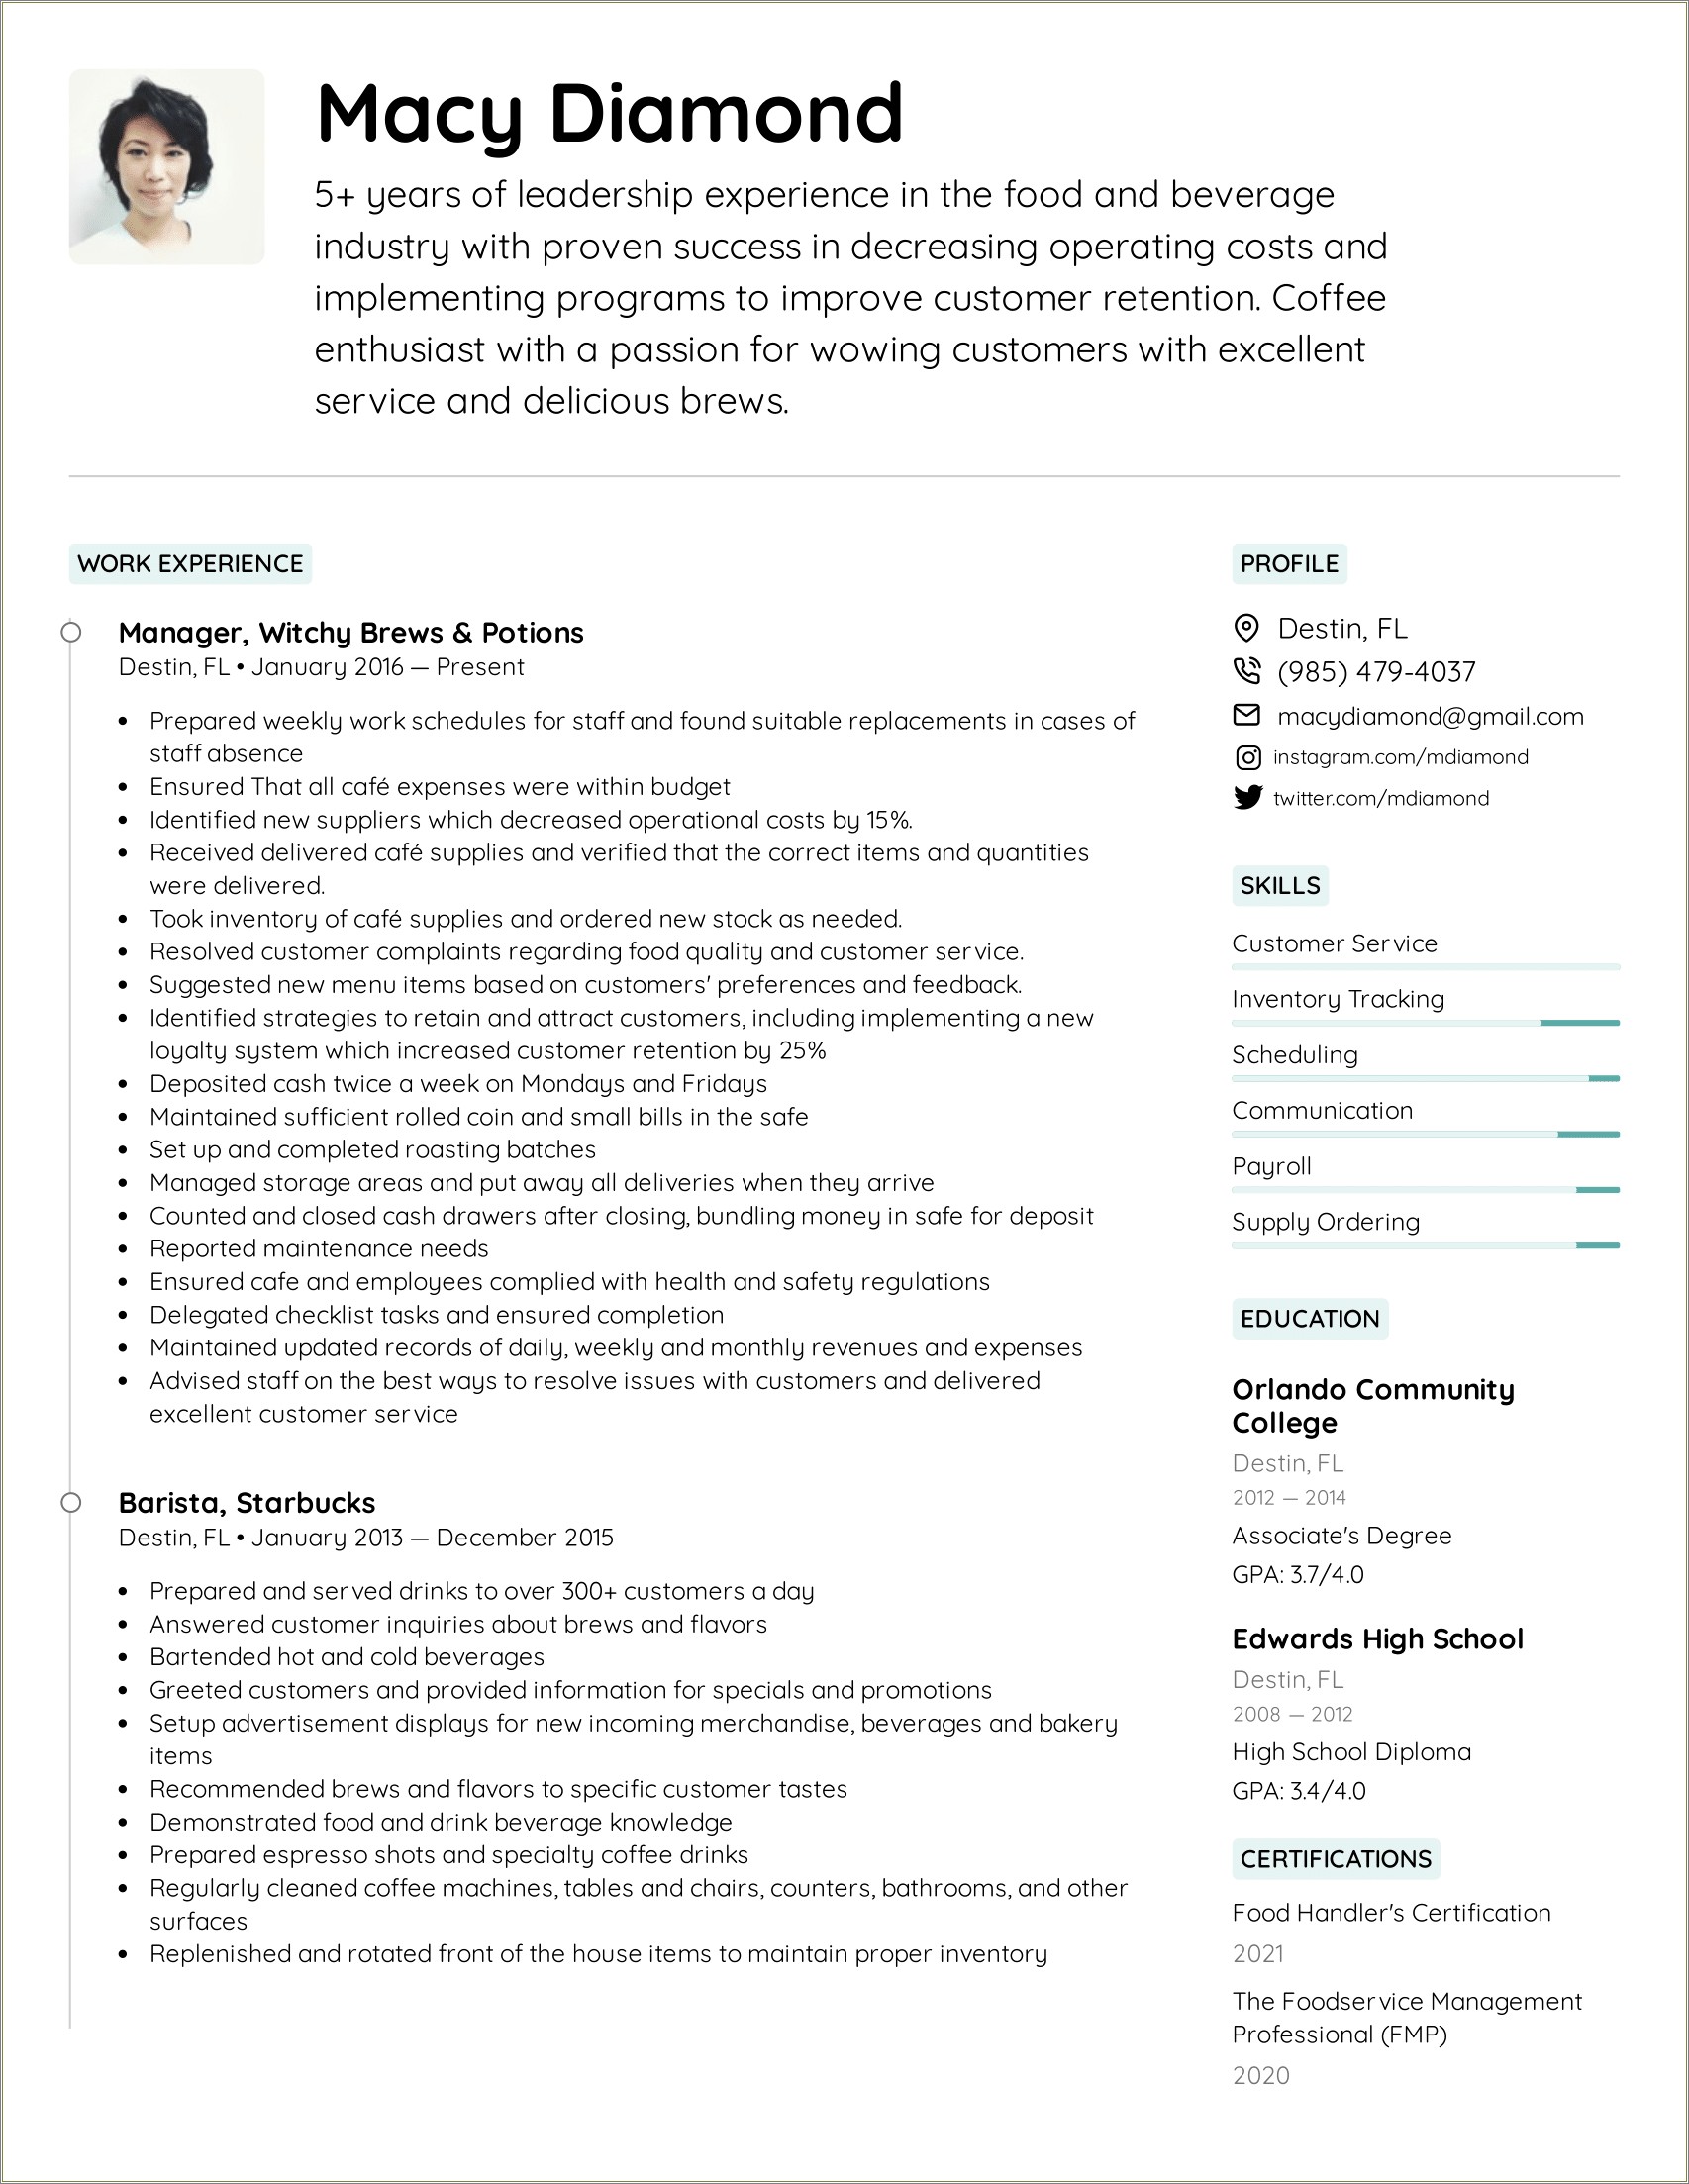 Examples Of Communication Skills In Resume